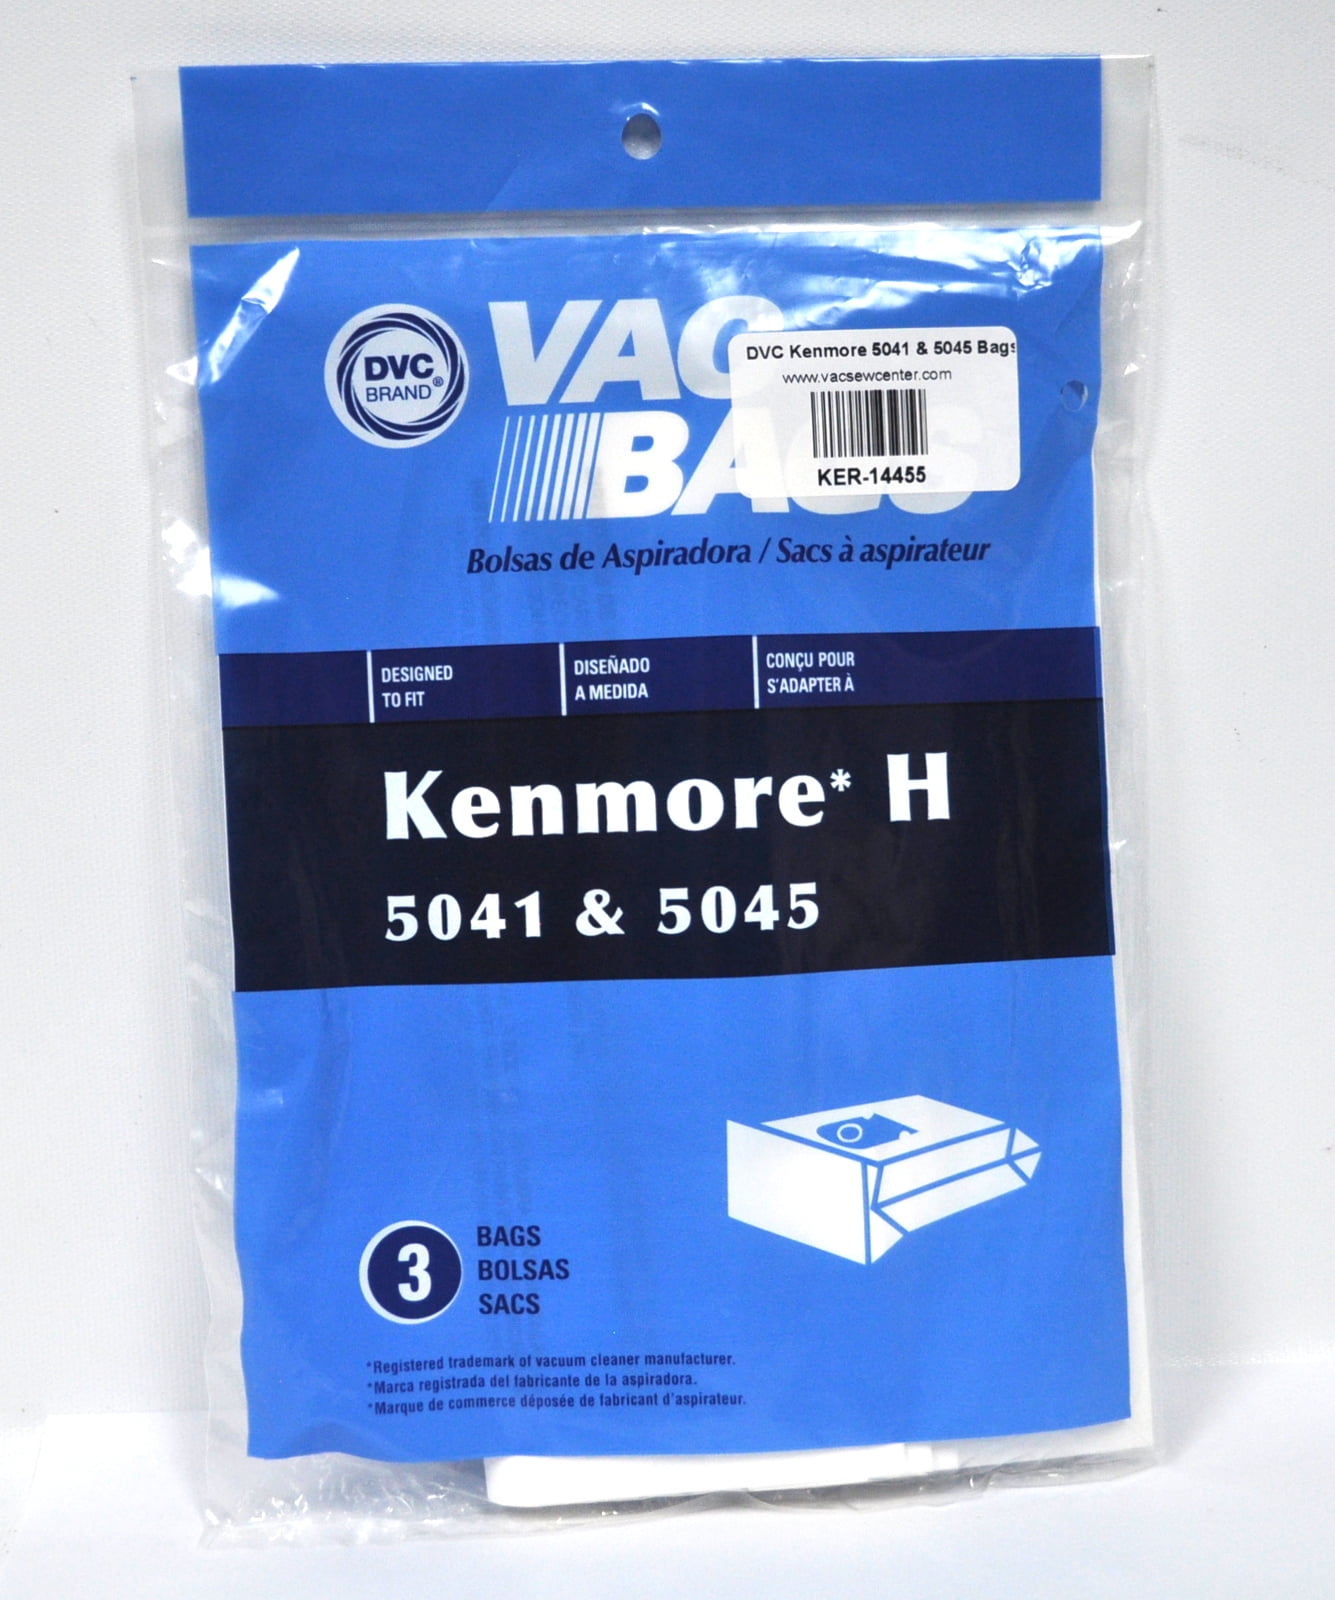 3 Vacuum Bags for Kenmore Caniser No 5041 5045 By DVC 